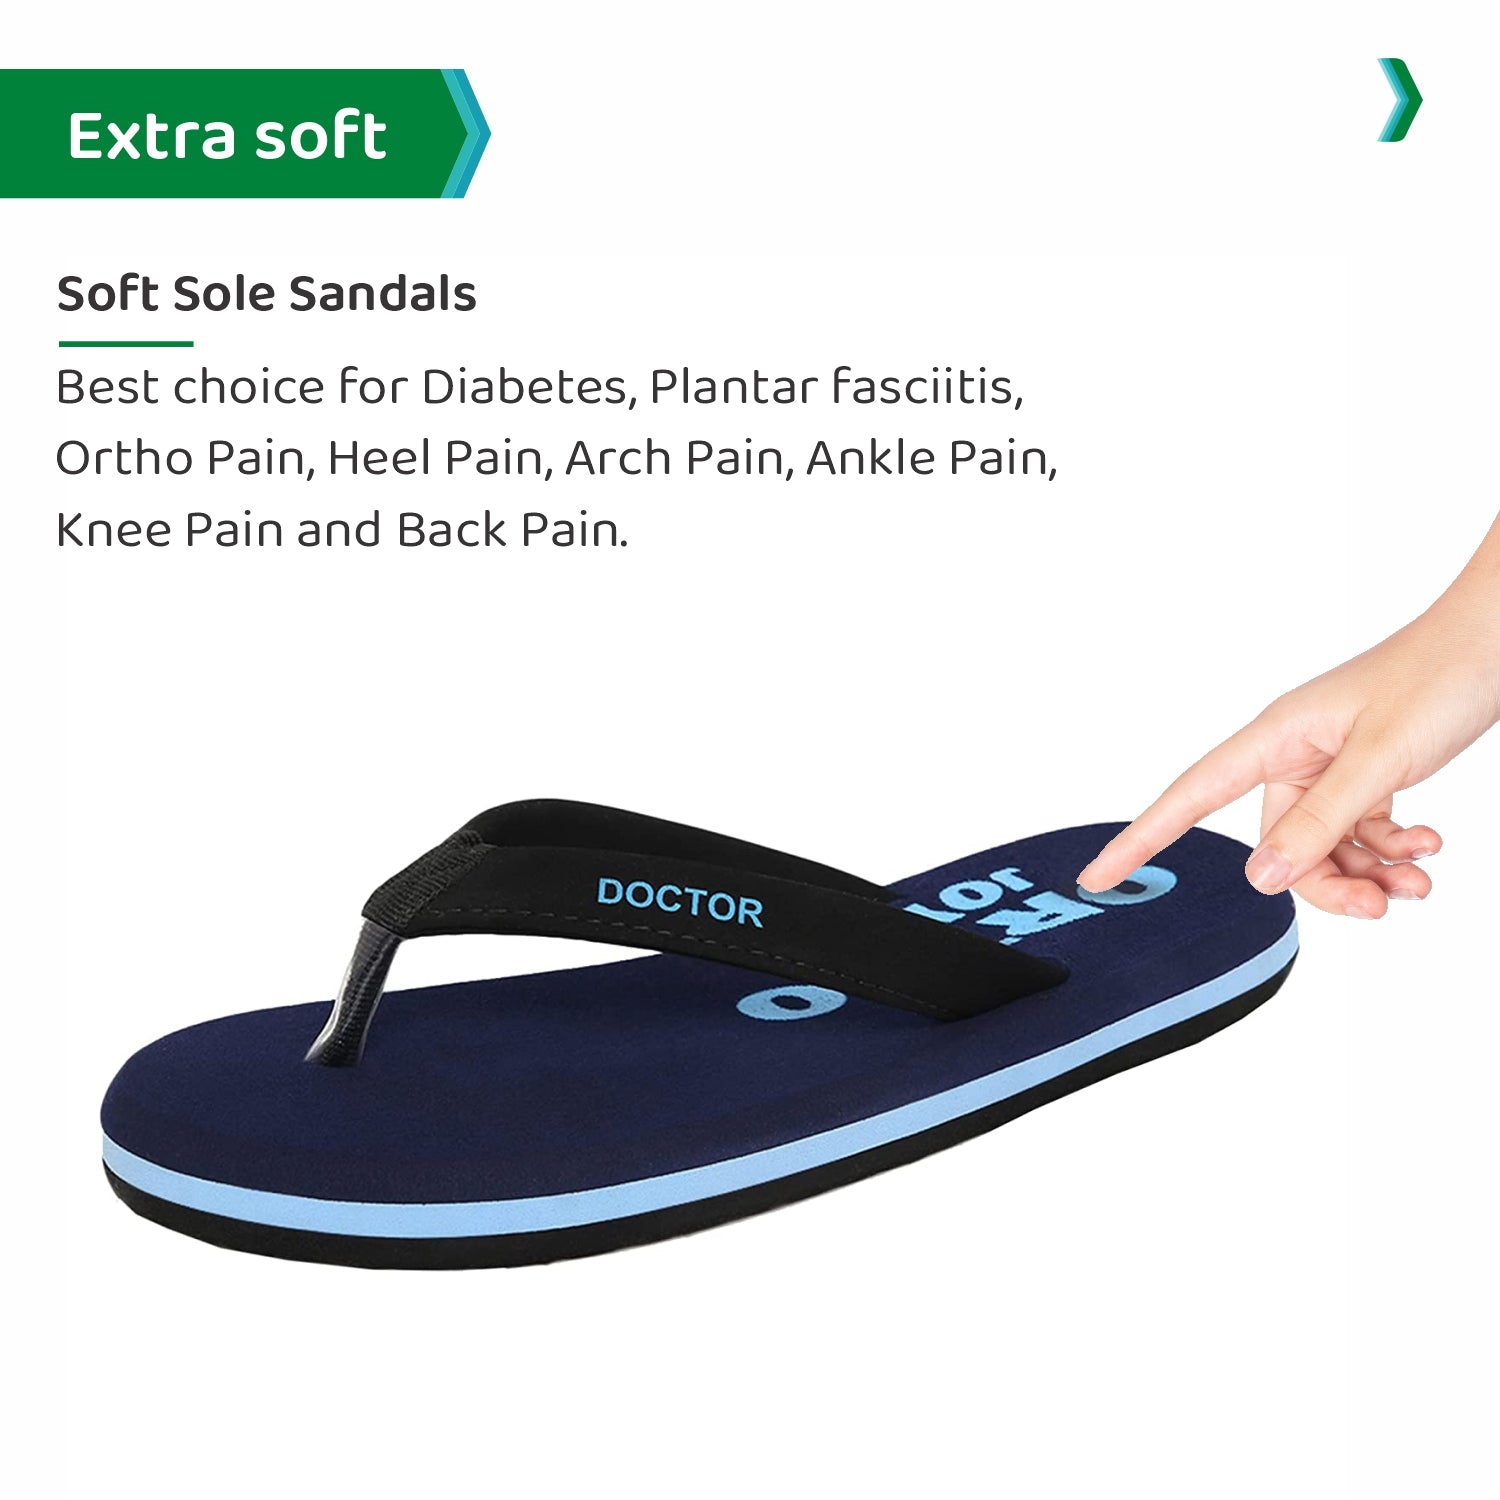 Men's slippers SOXO SUPER SOFT with non-slip sole and PVC insets | SOXO |  Socks, slippers, tights and more